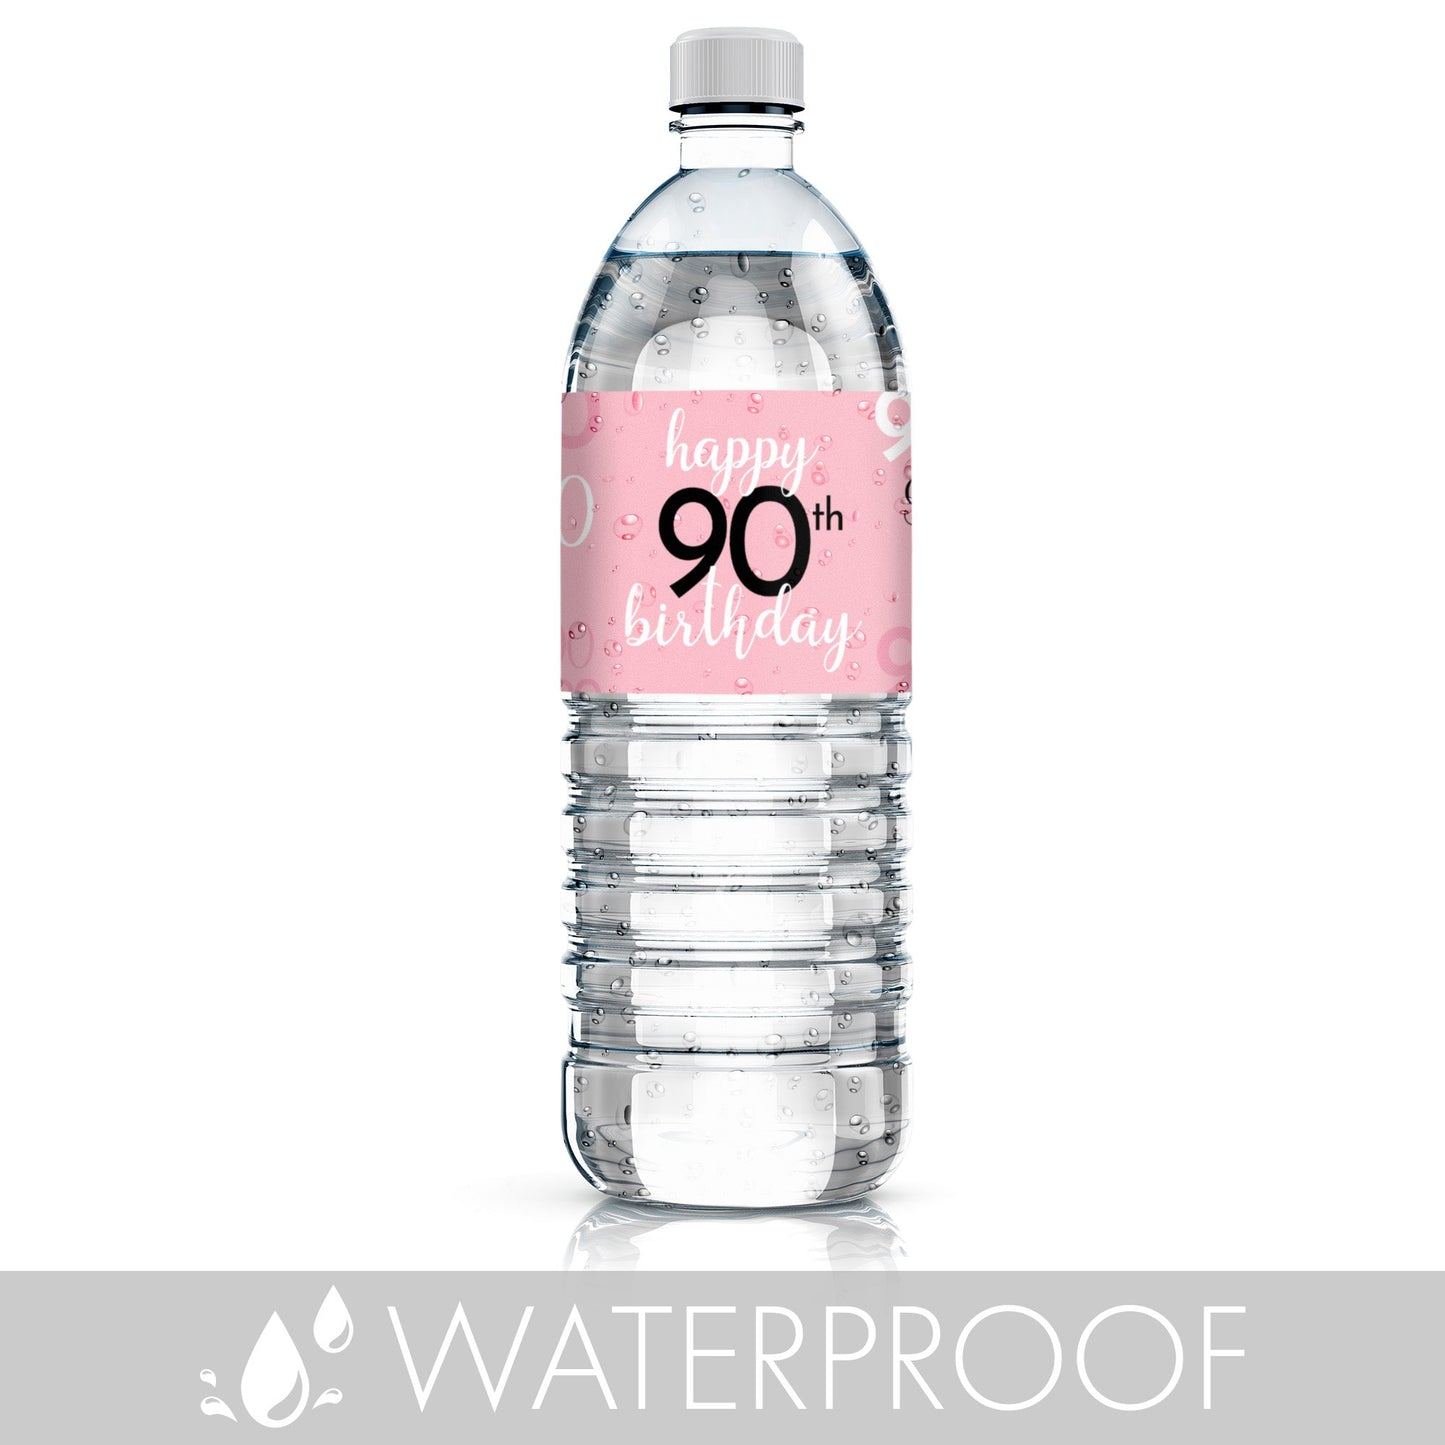 Personalize your water bottles with waterproof labels in a stylish 90th pink and black design